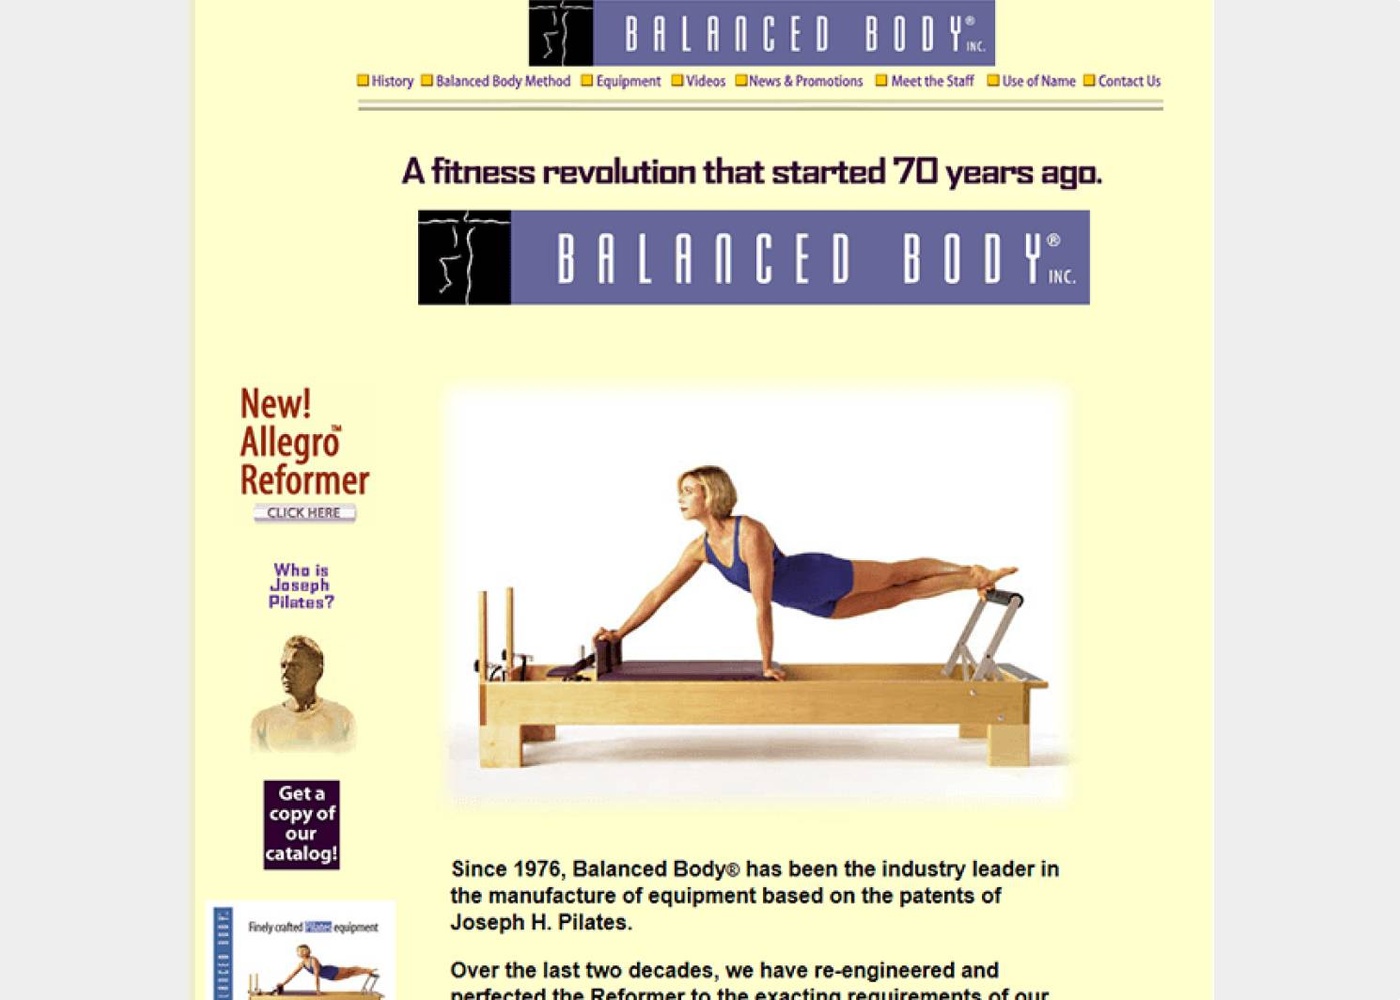 Our Founder began working on the Allegro 2 reformer over 10 years ago  because of its versatility and aesthetic. To this day we are still